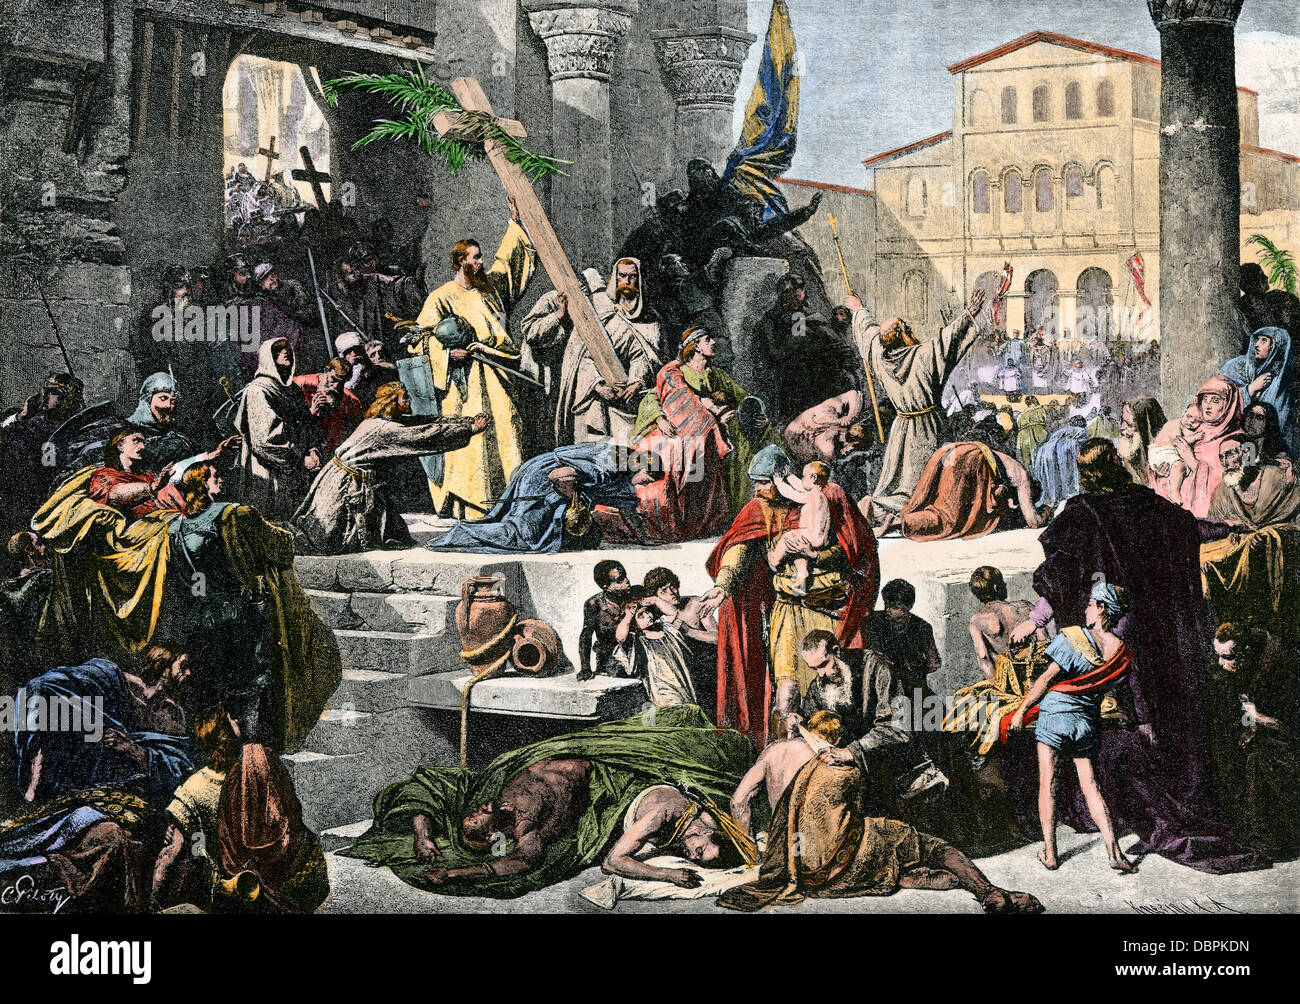 Godfrey de Bouillon entering Jerusalem in the First Crusade. Hand-colored halftone reproduction of an illustration Stock Photo